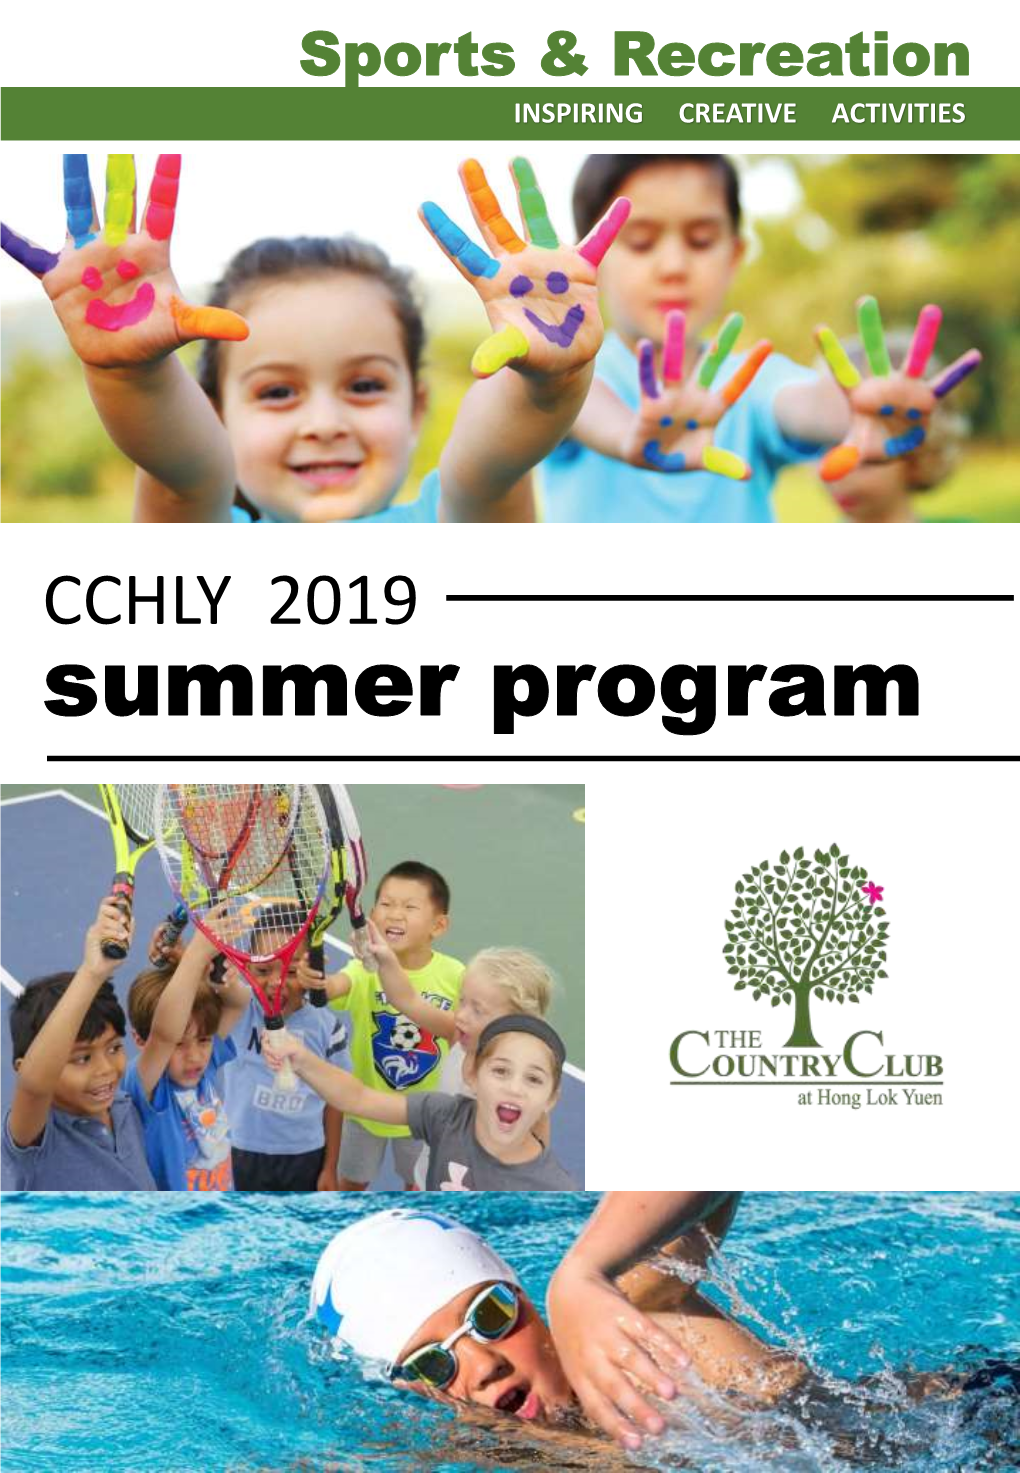 Summer Program for Juniors Age 4 to 10 Years Old CCHLY SUMMER Junior Tennis Camp